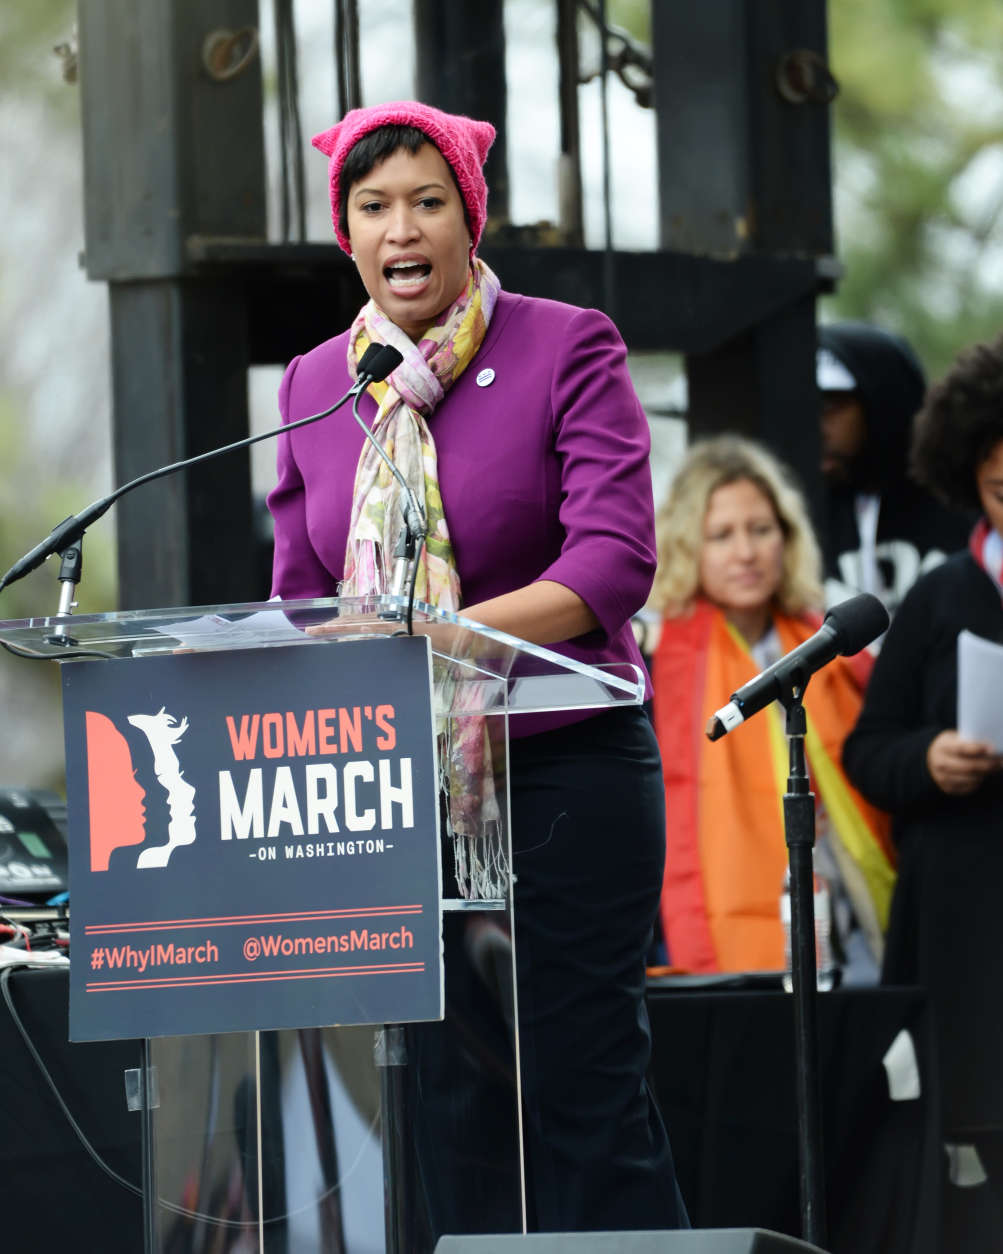 Washington, D.C. Mayor Muriel bowser takes the stage during the Women's March on Washington on Jan. 21, 2017. (Courtesy Shannon Finney)